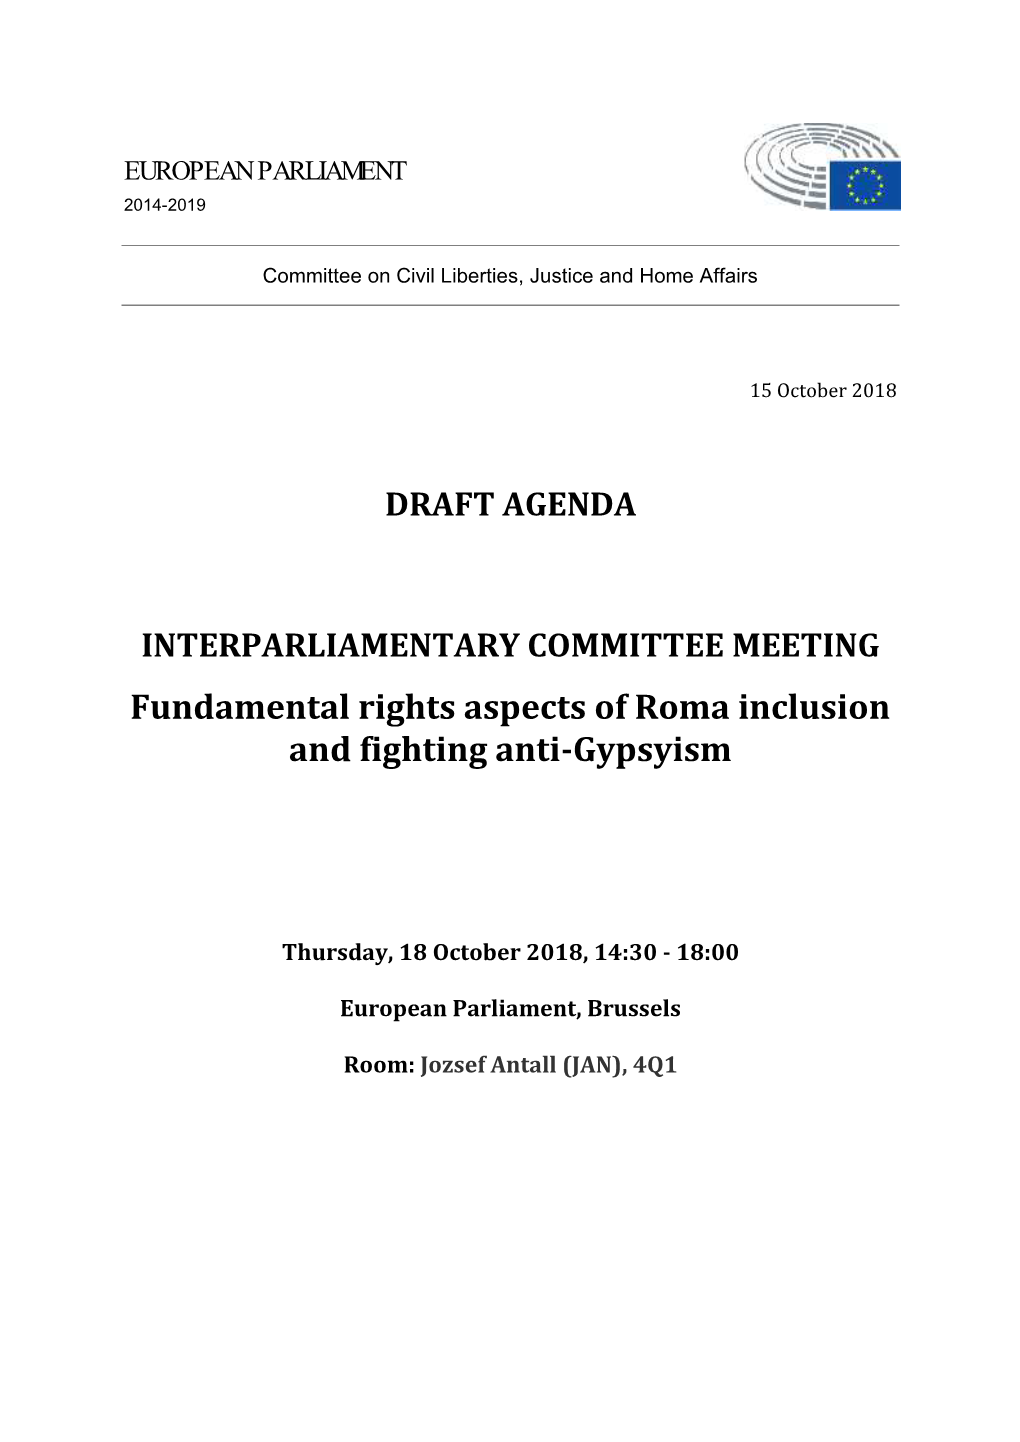 Fundamental Rights Aspects of Roma Inclusion and Fighting Anti-Gypsyism